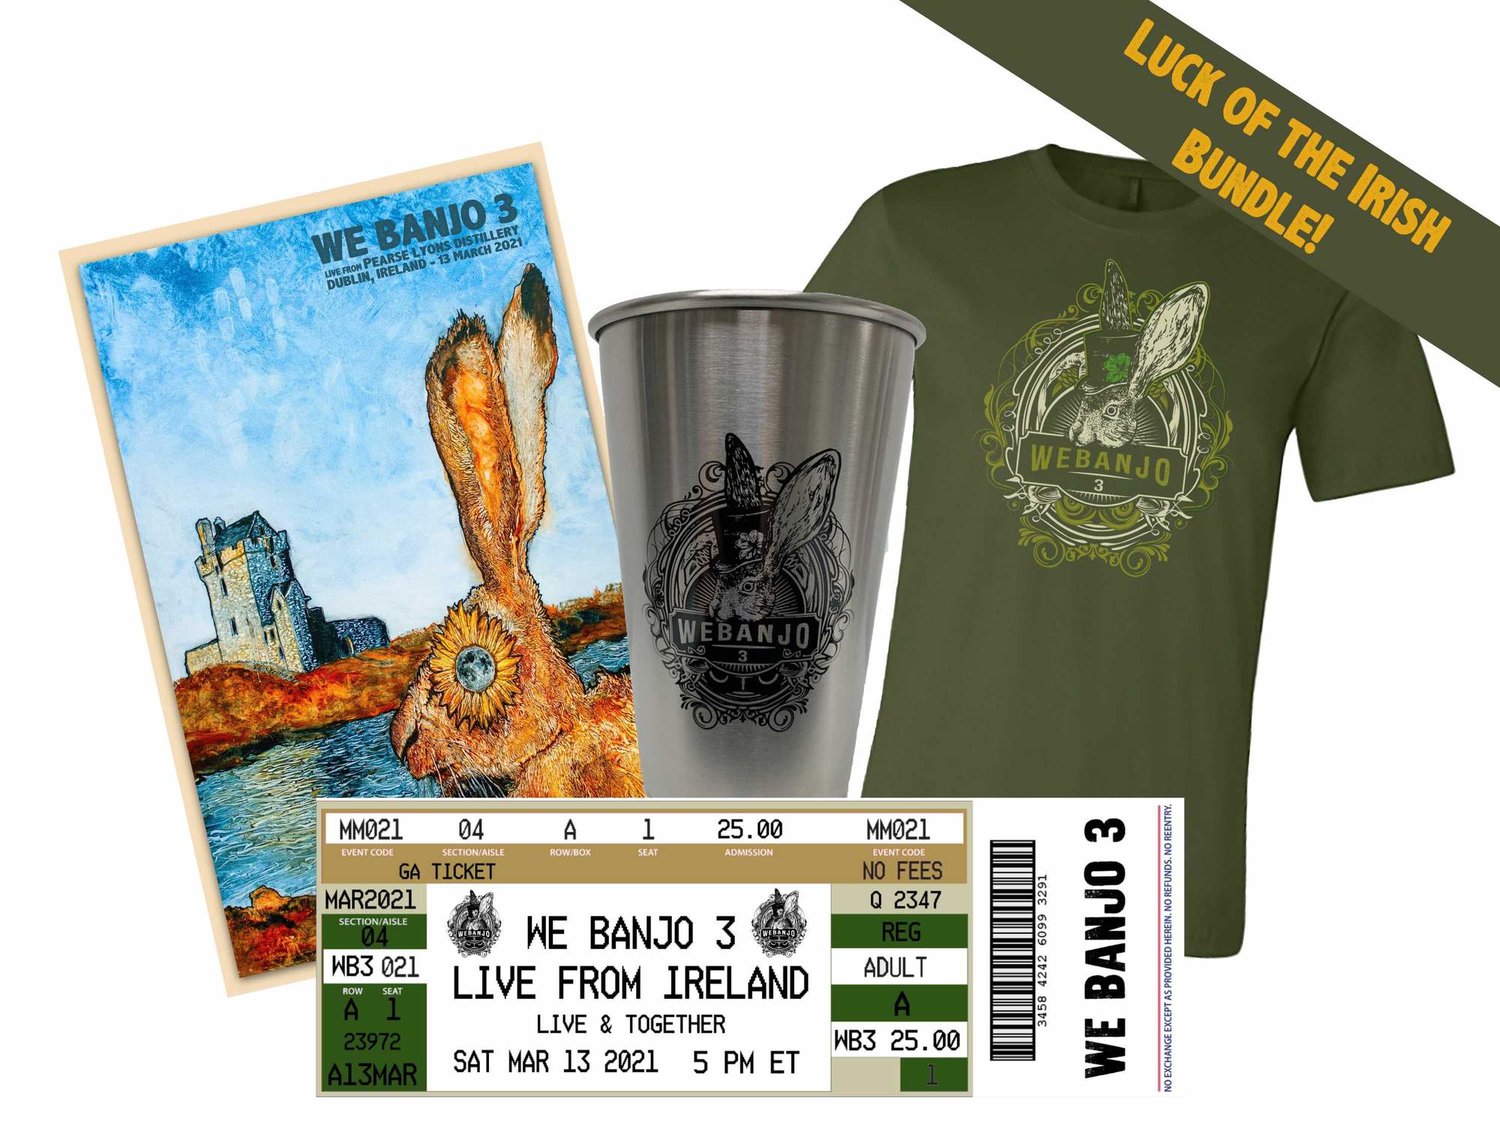 The “Luck of the Irish” bundle on sale now from $49. It includes tickets to the event, a WB3 T-shirt, a steel pint and commemorative poster.